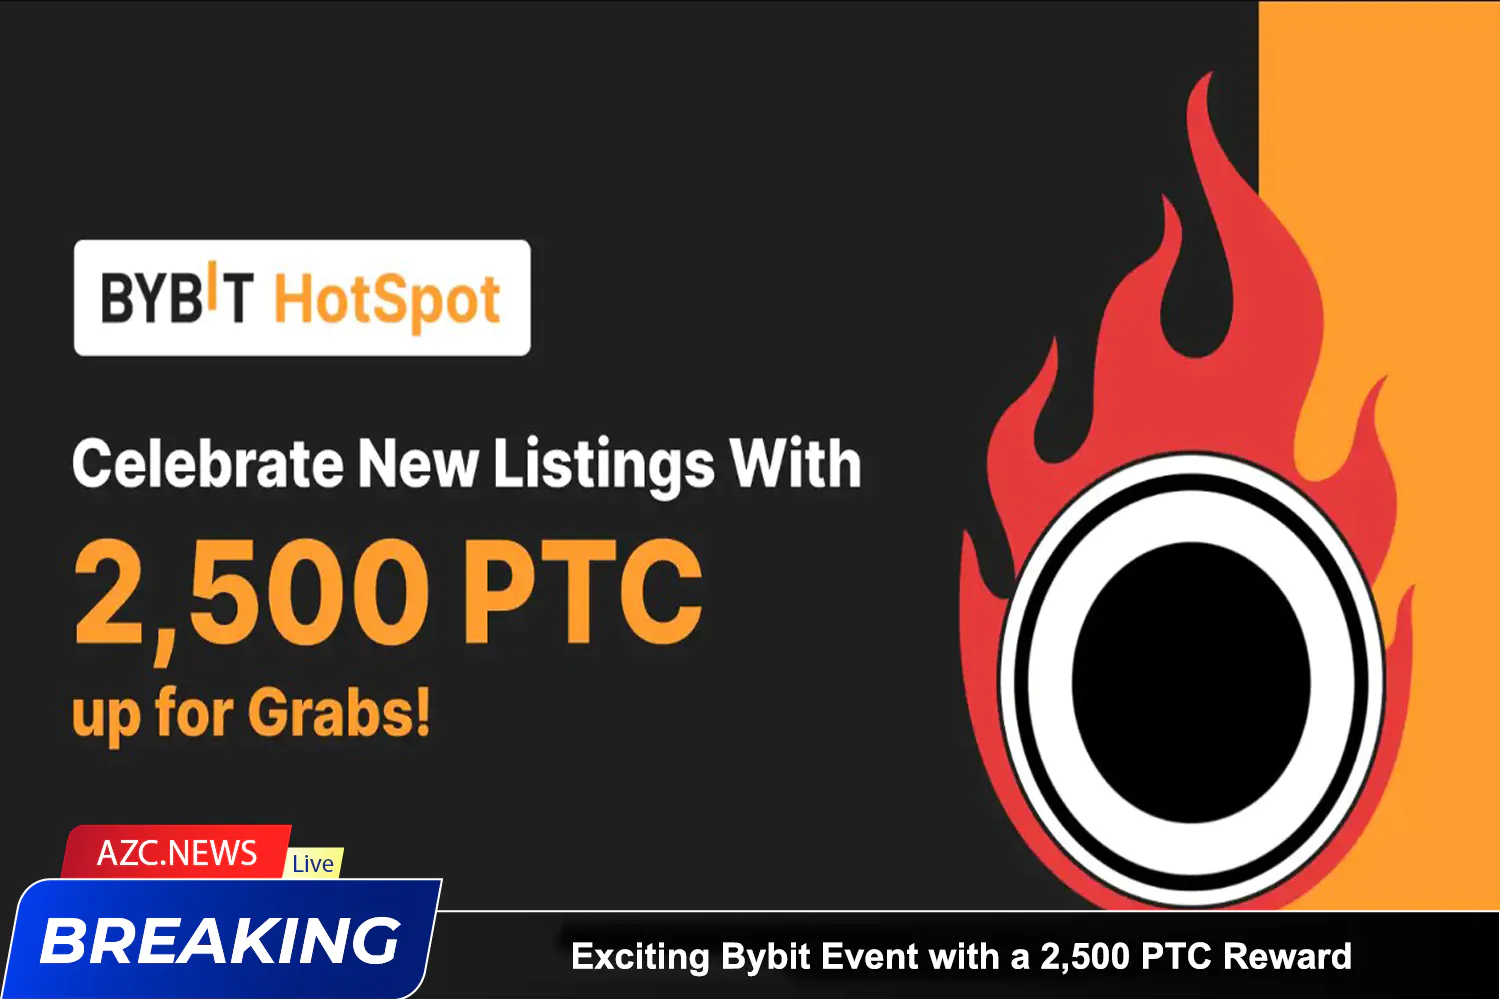 Azcnews Exciting Bybit Event With A 2,500 Ptc Reward